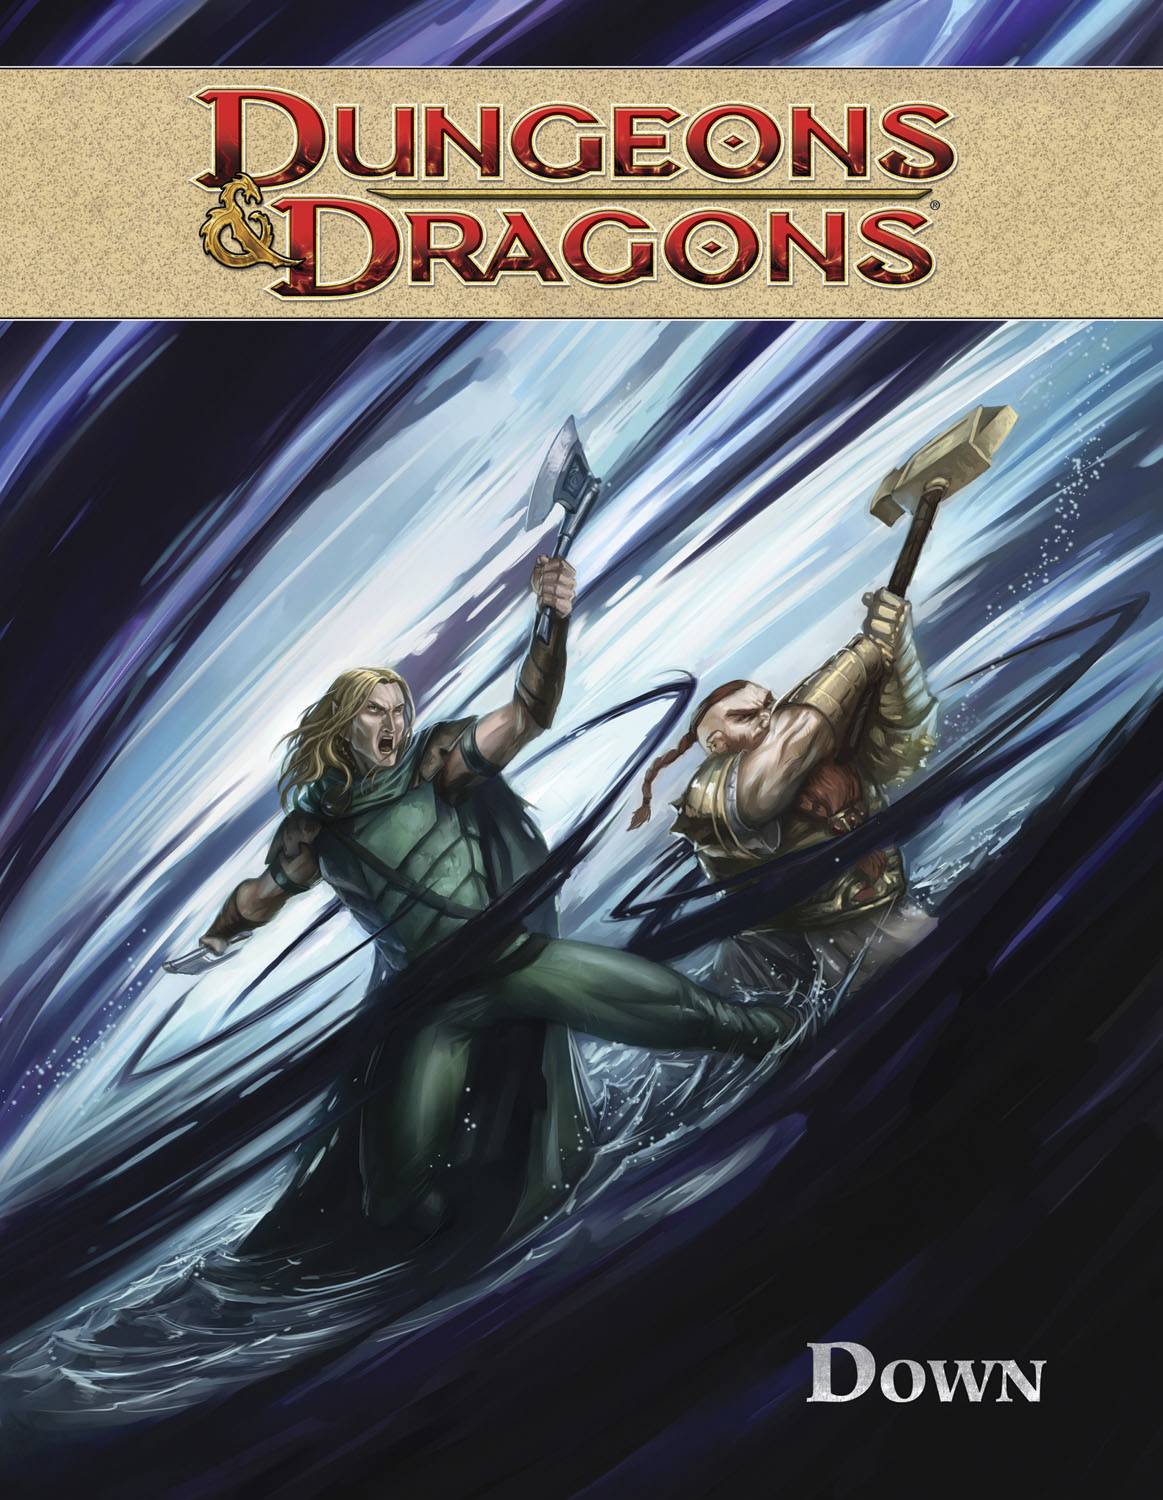 Dungeons & Dragons Graphic Novel Volume 3 Down